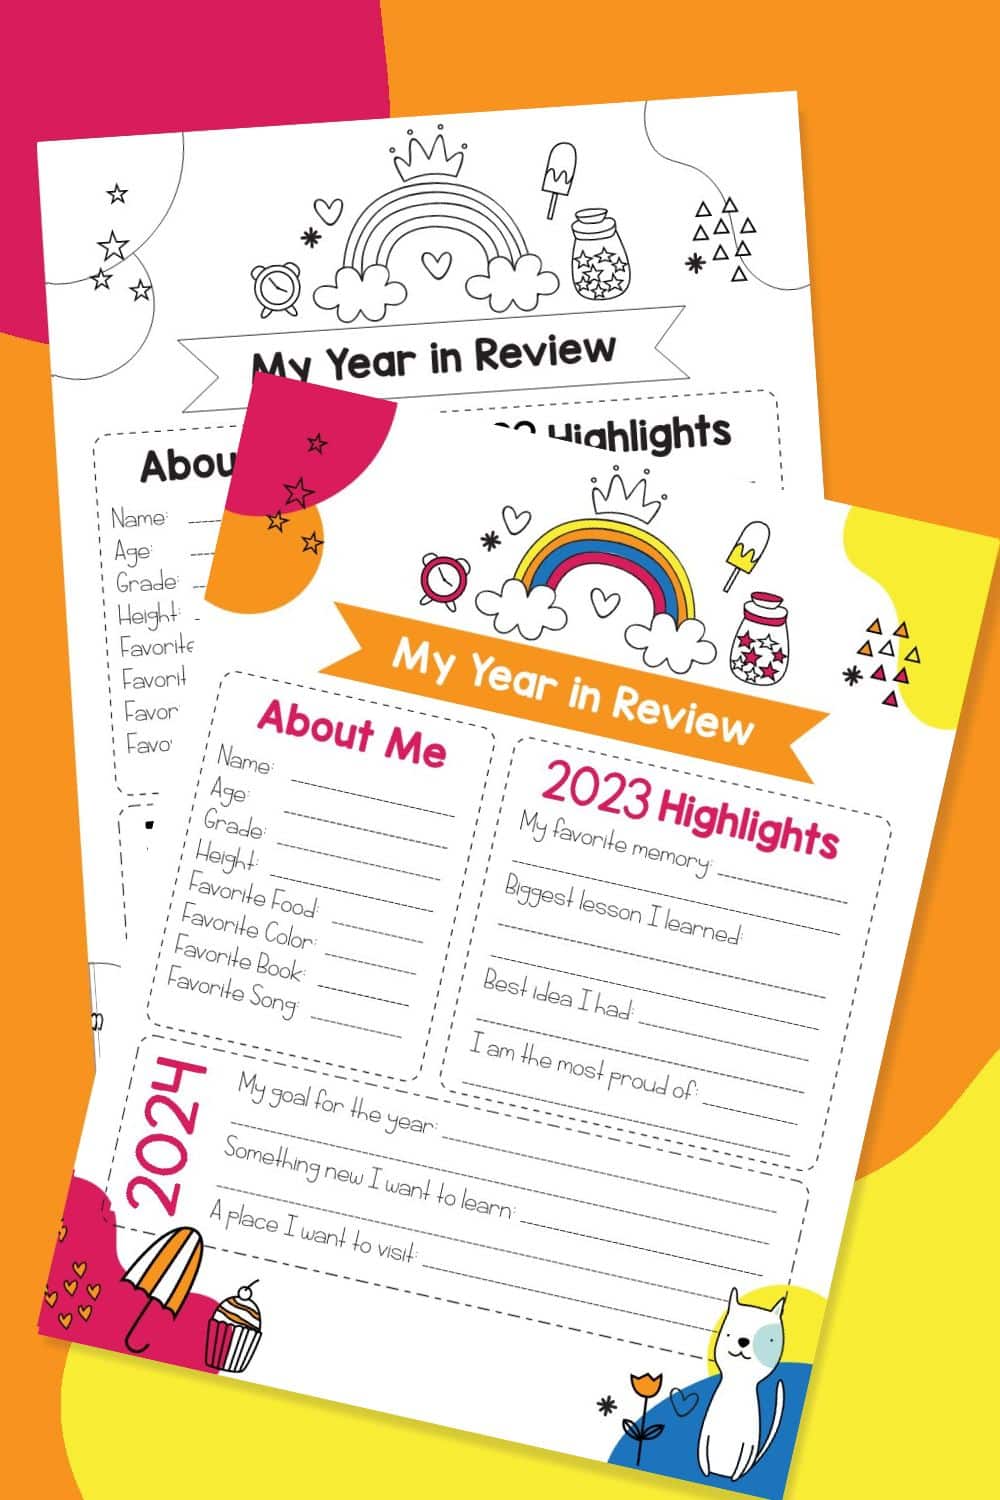 My year in review worksheets for kids.